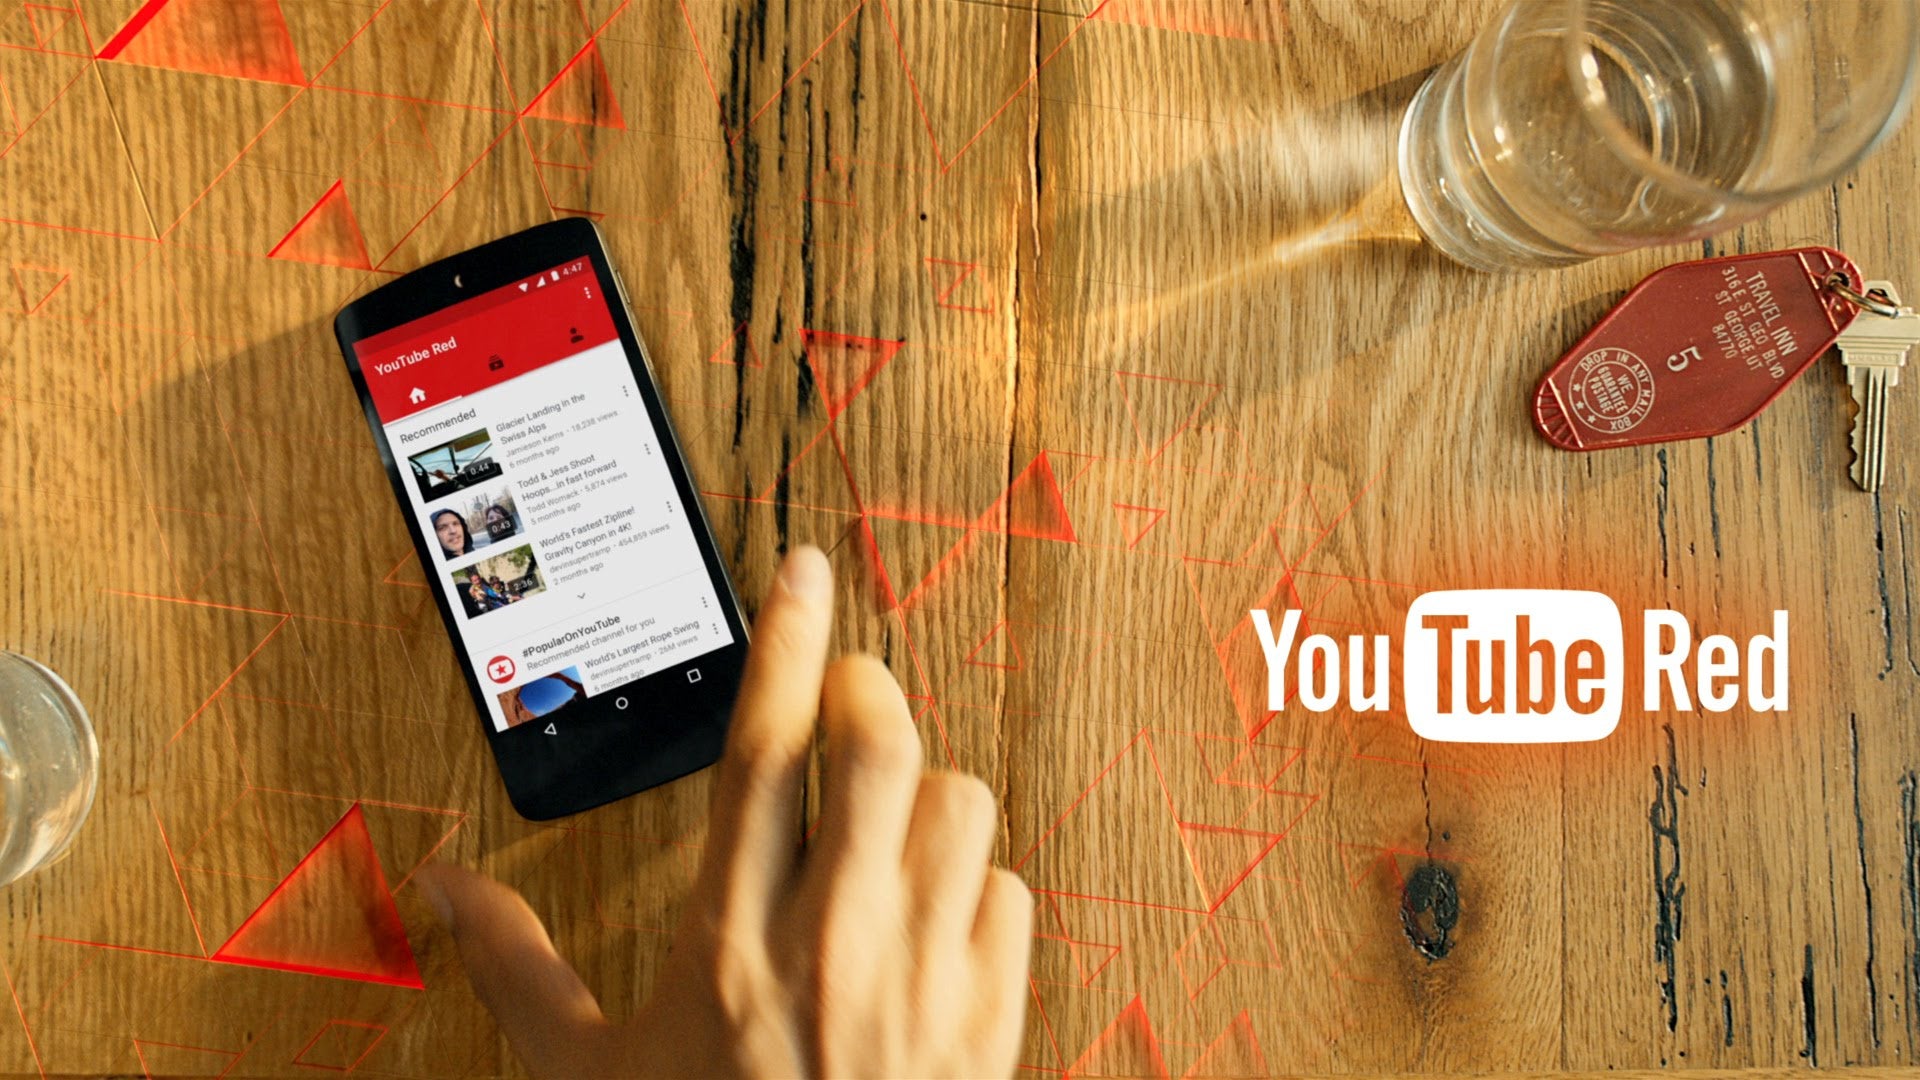 YouTube Red could make U.K. and European debut in 2017